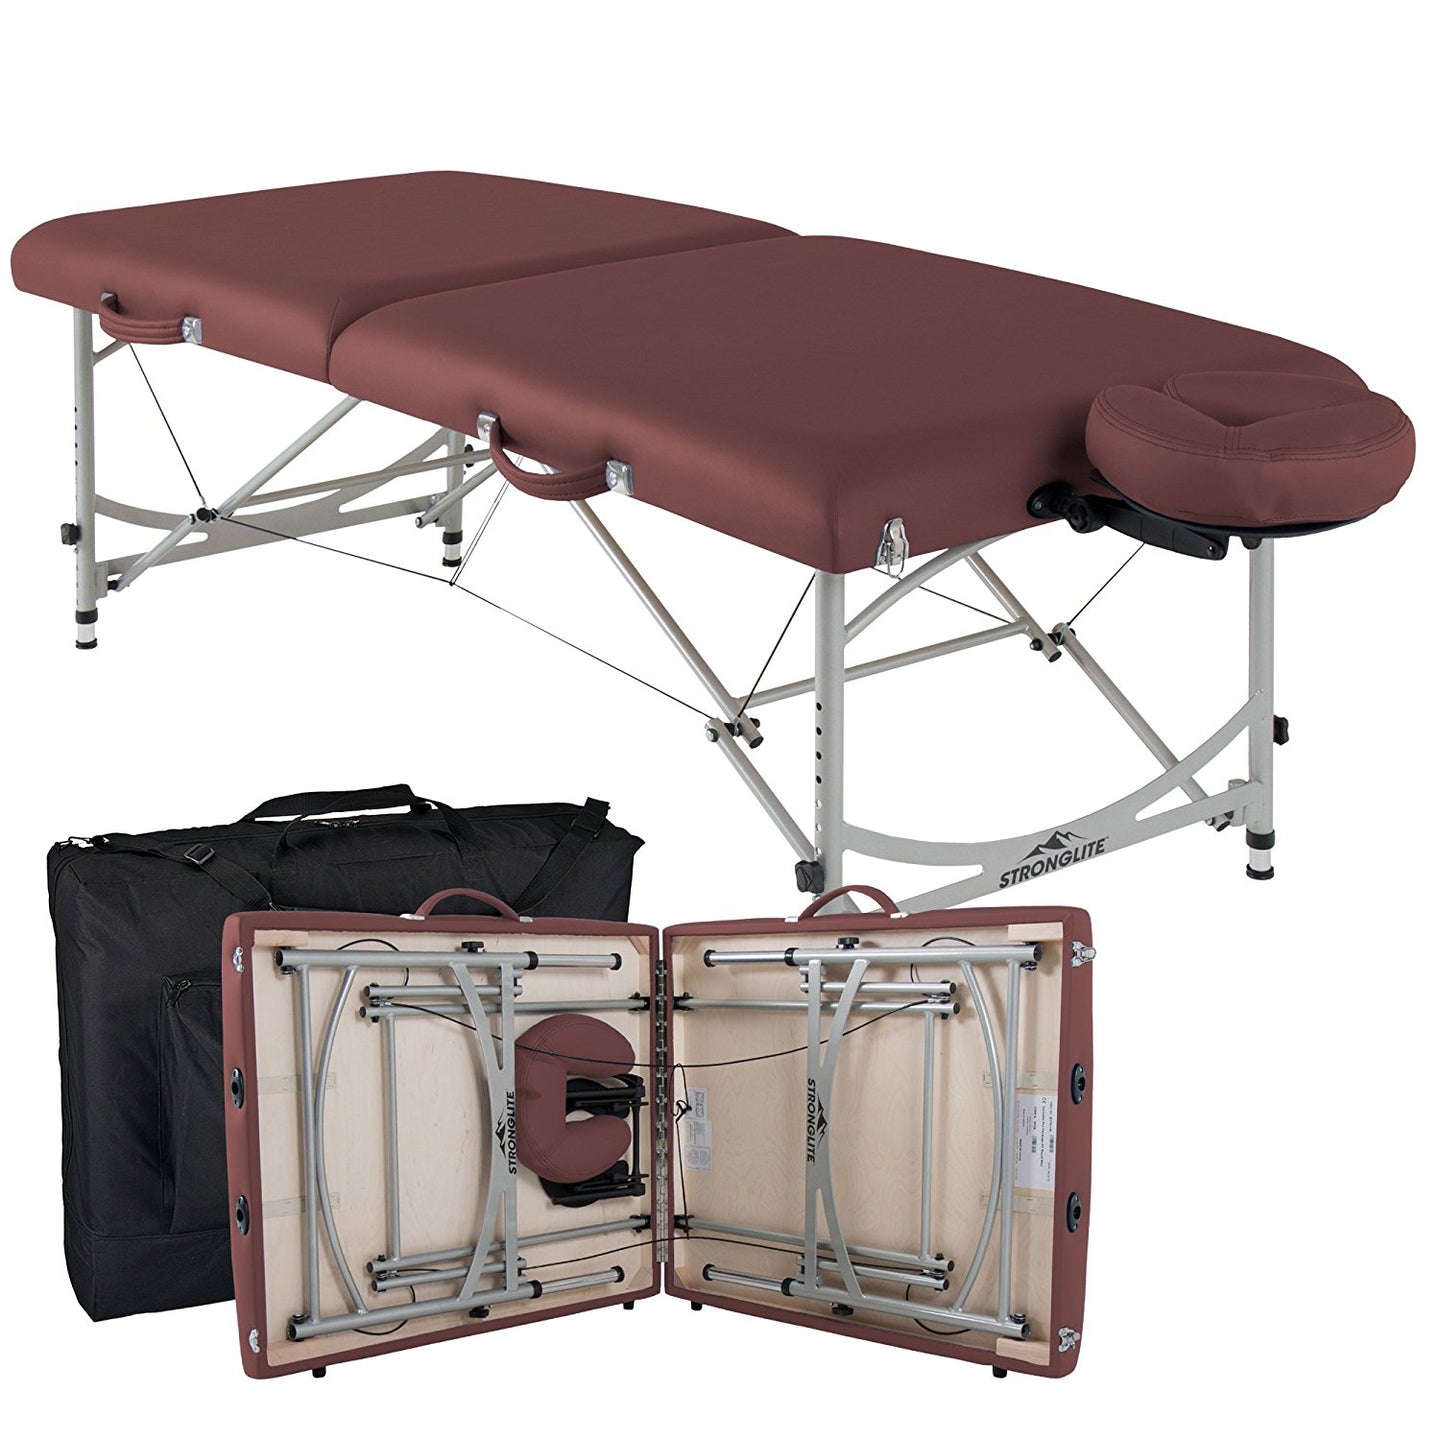 Stronglite - Versalite Pro Portable Massage Table Package 30